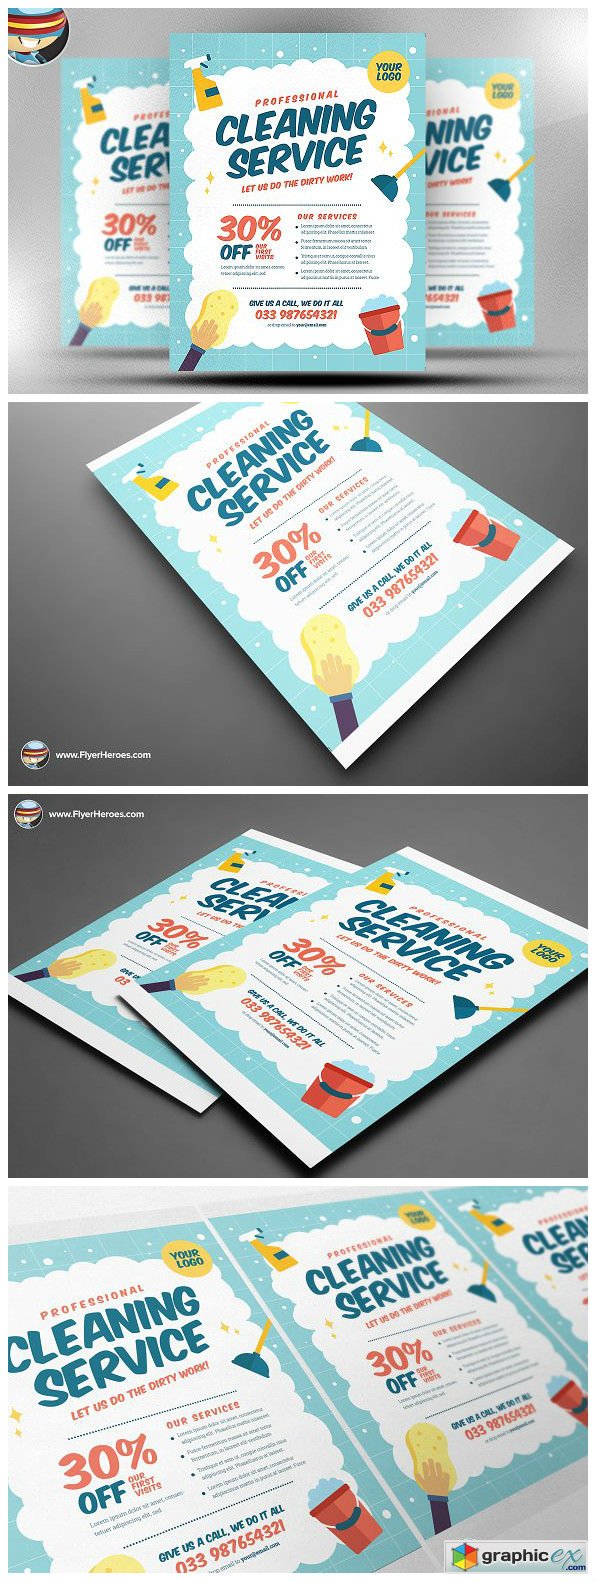 Cleaning Service Flyer Template V2